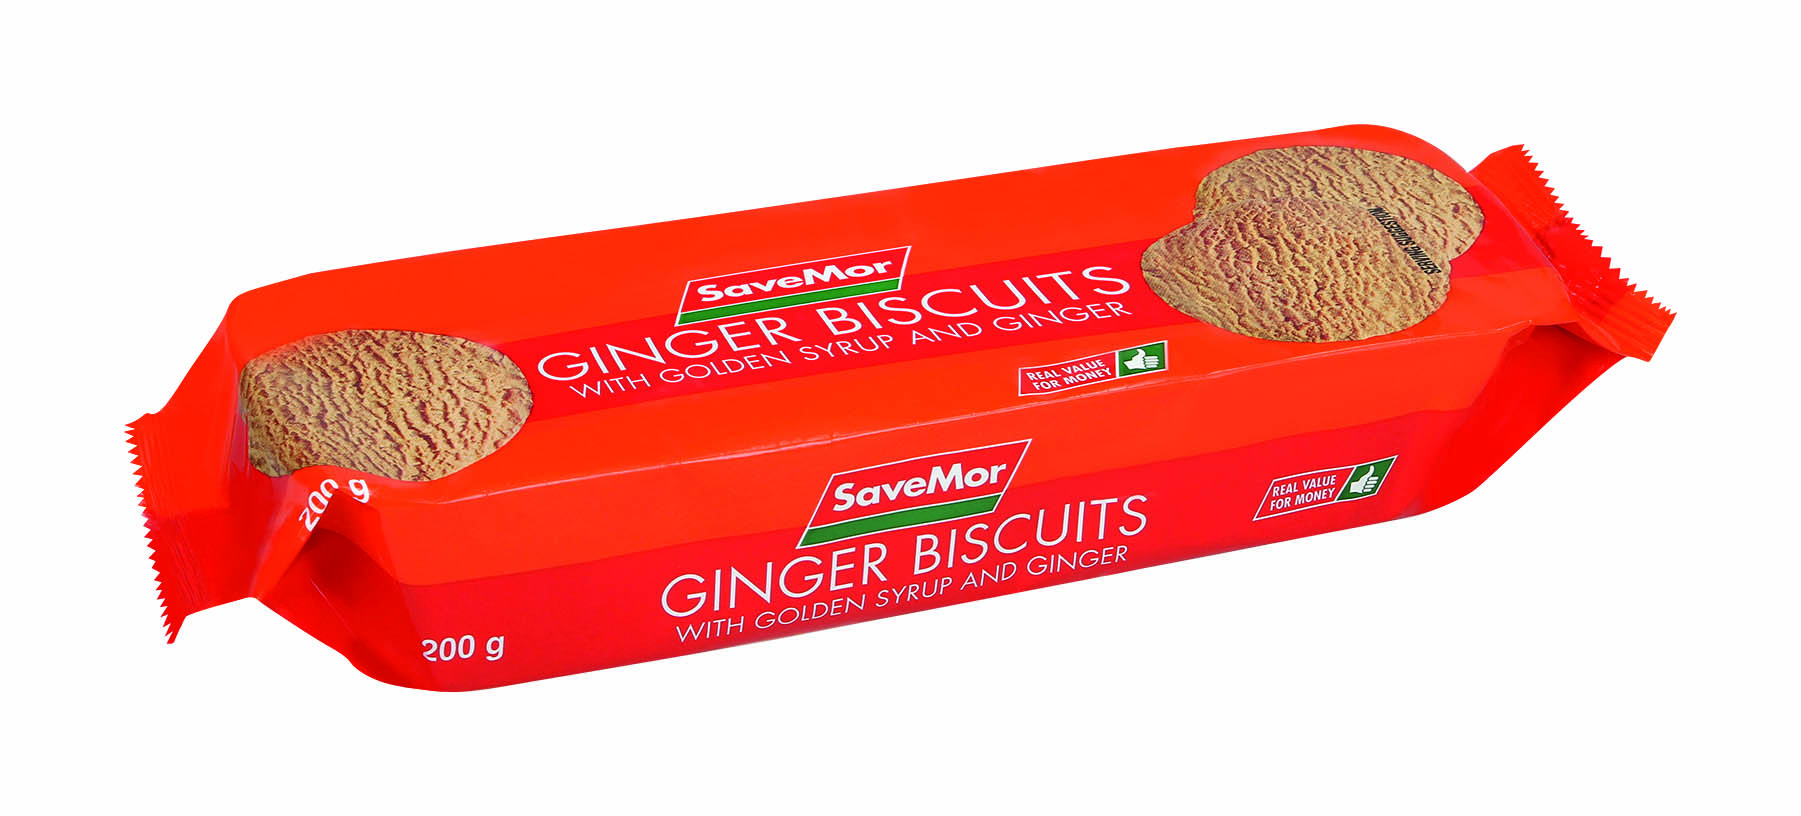 ginger biscuits with golden syrup and ginger 